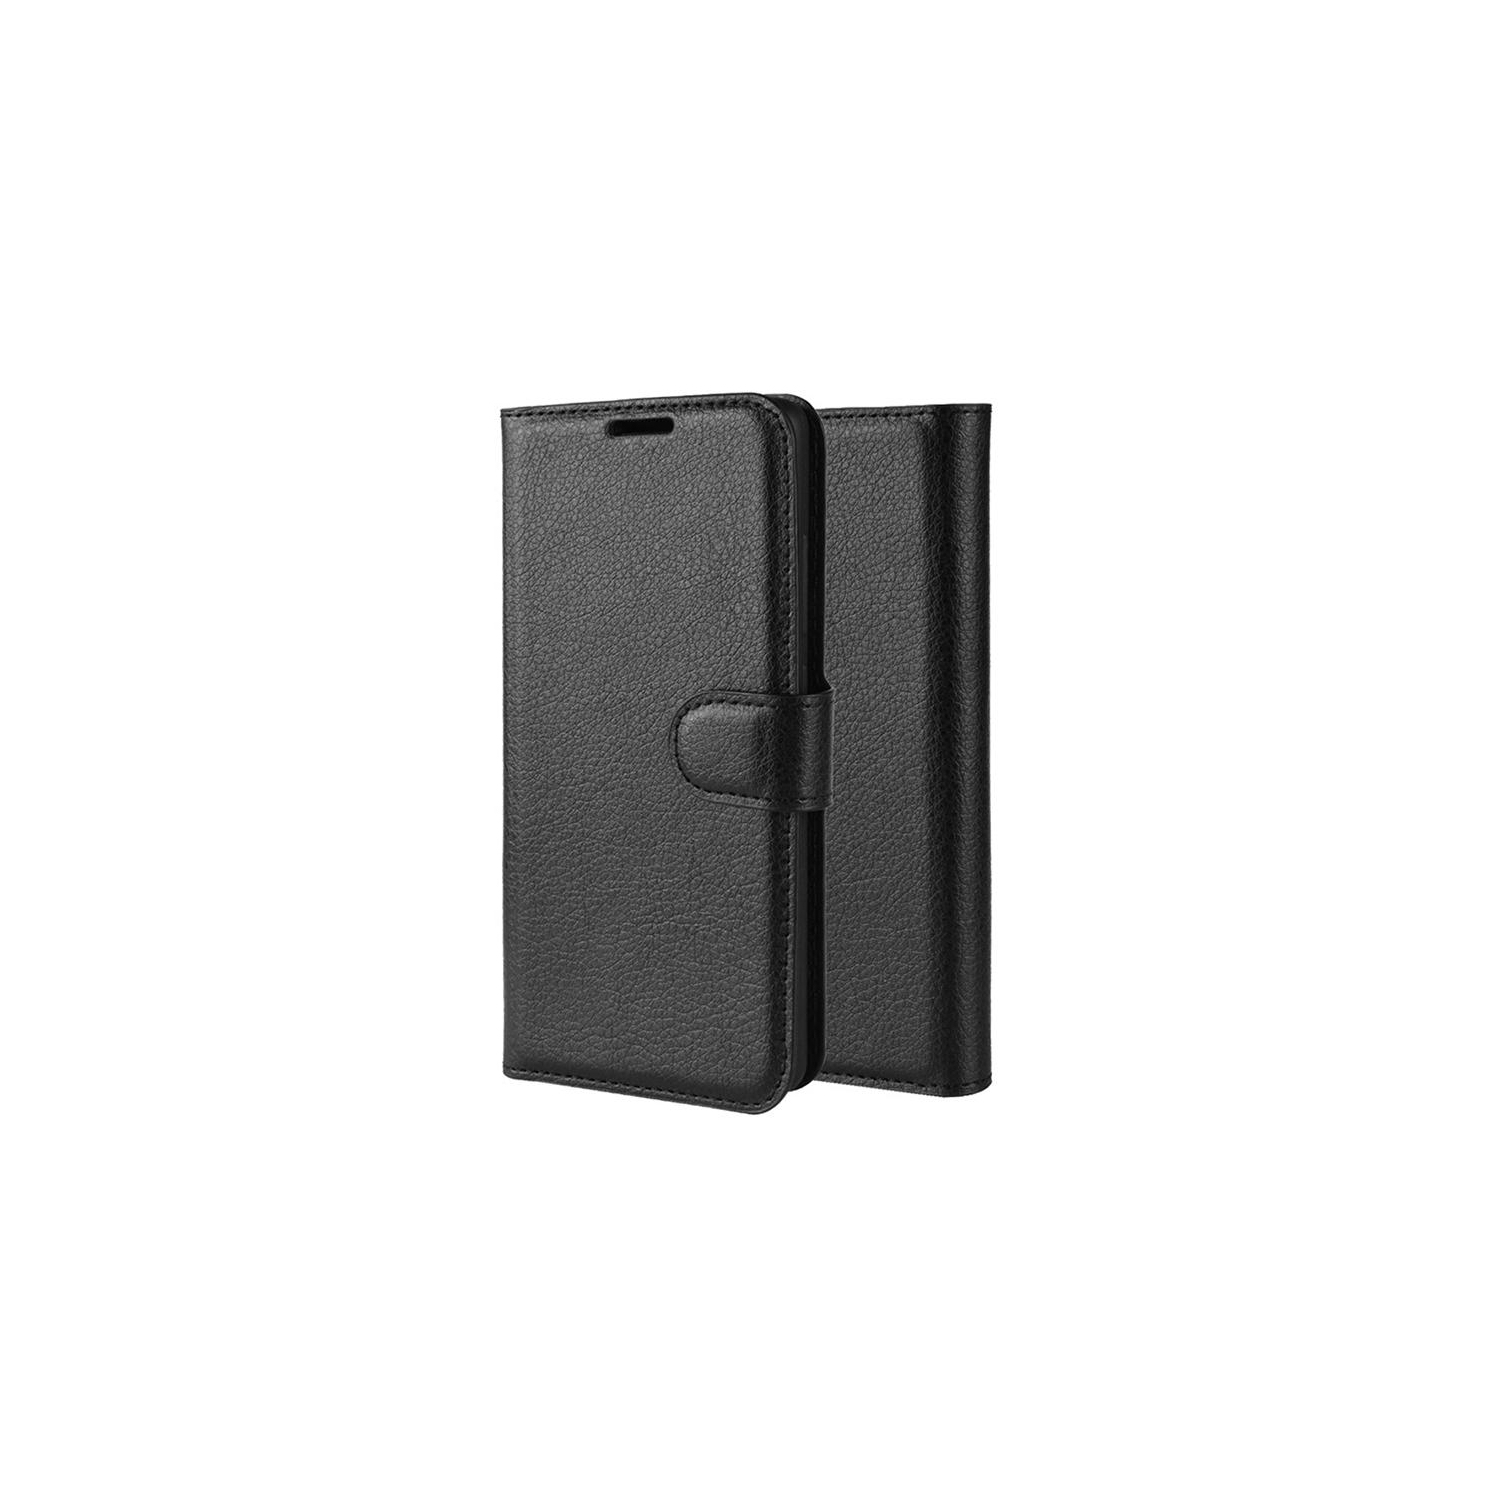 PANDACO Black Leather Wallet Case for Samsung Galaxy S10e